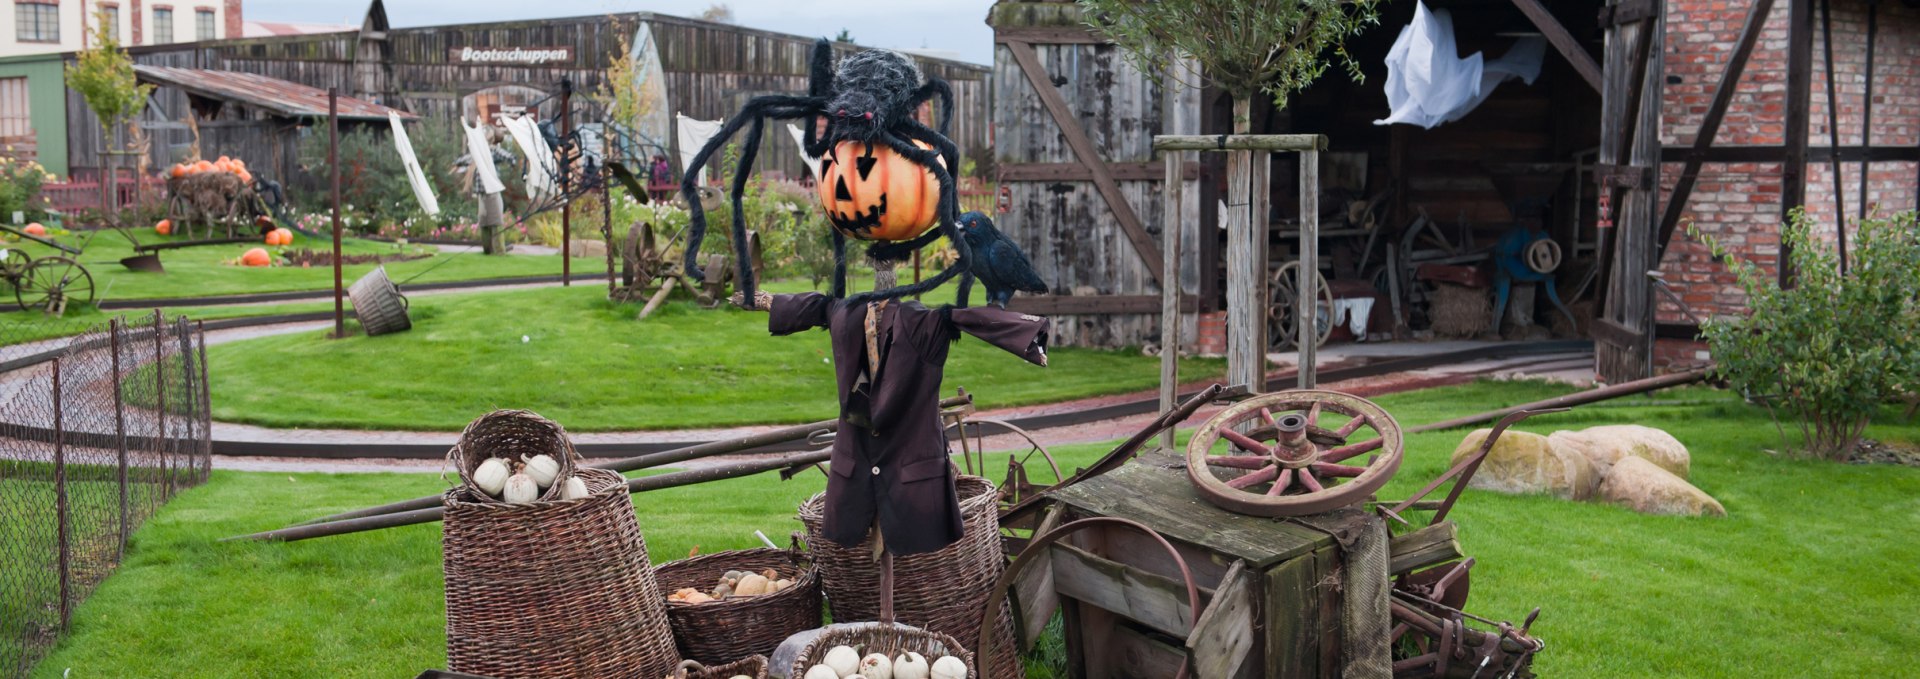 Spooky decorations also outside in the adventure village, © Karls Erlebnis-Dorf